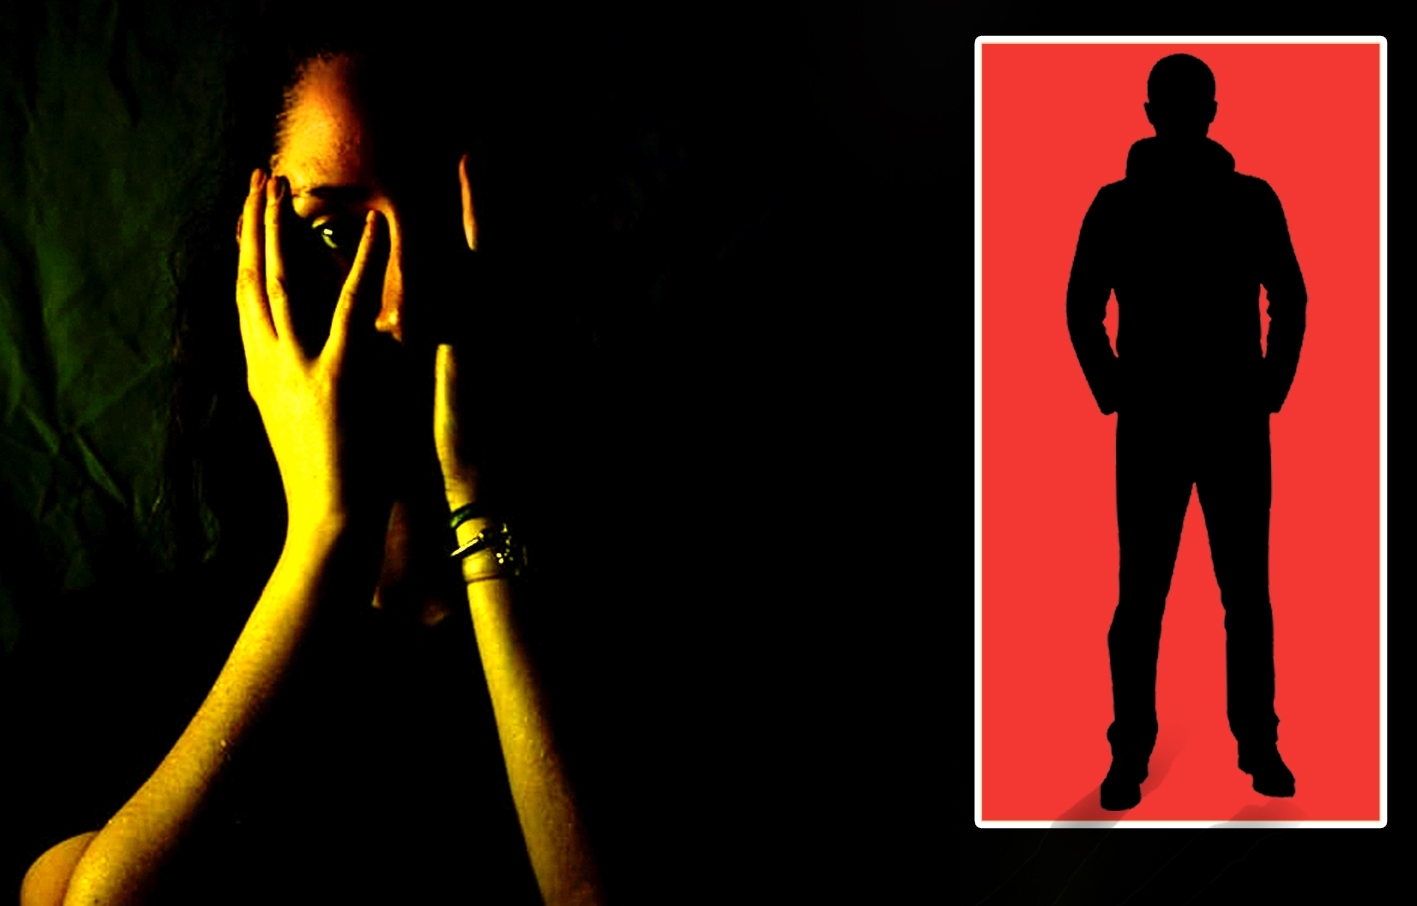 Television actress accused of raping casting director, the investigation continues: Mumbai Police